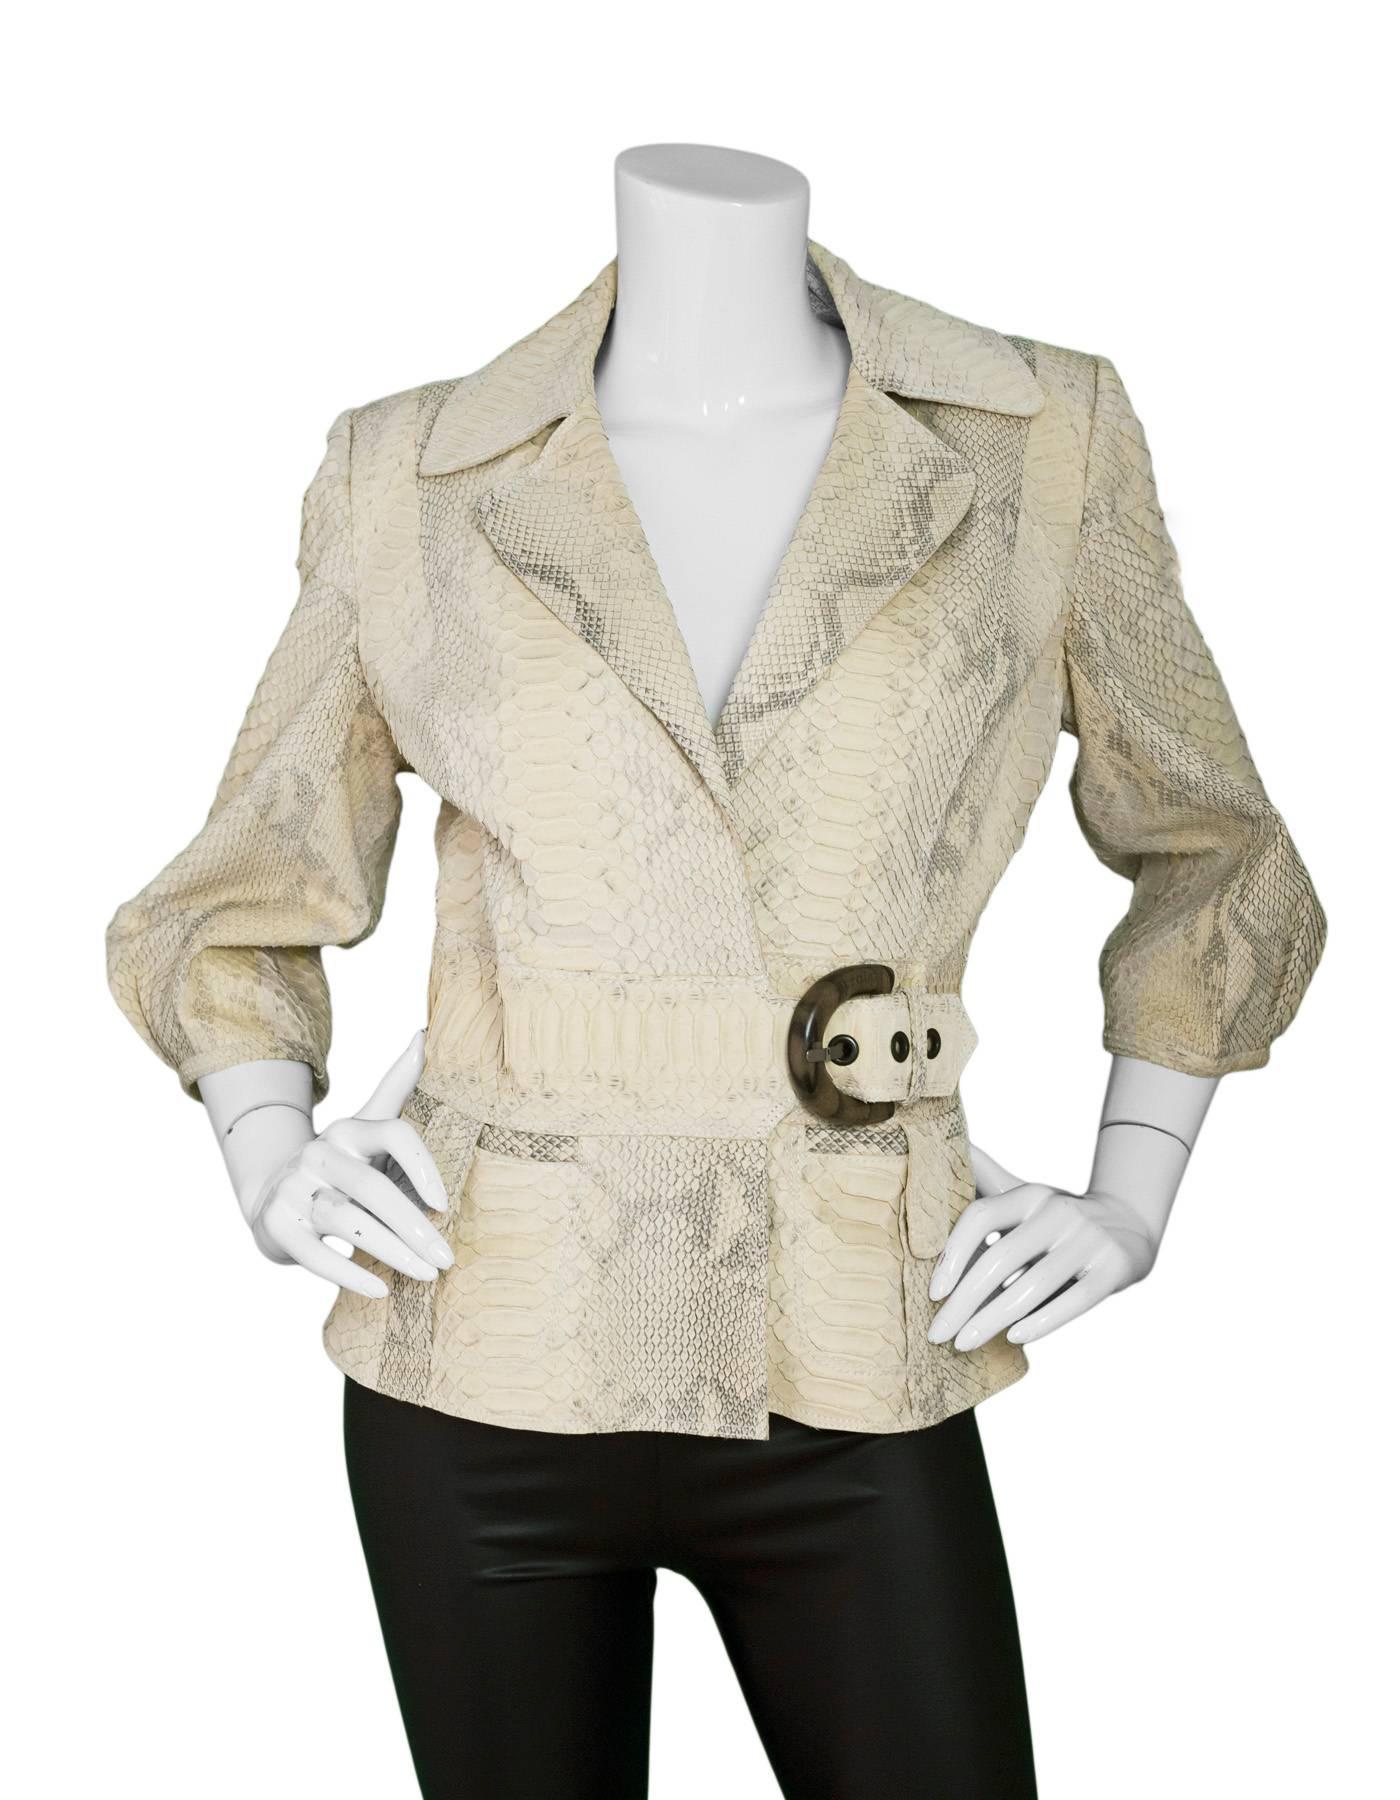 Jitrois Cream Snakeskin Jacket Sz IT44

Color: Cream
Composition: Not listed
Lining: Cream textile
Closure/Opening: Front buckle closure at hip
Overall Condition: Very good pre-owned condition with the exception of some soiling at interior lining at